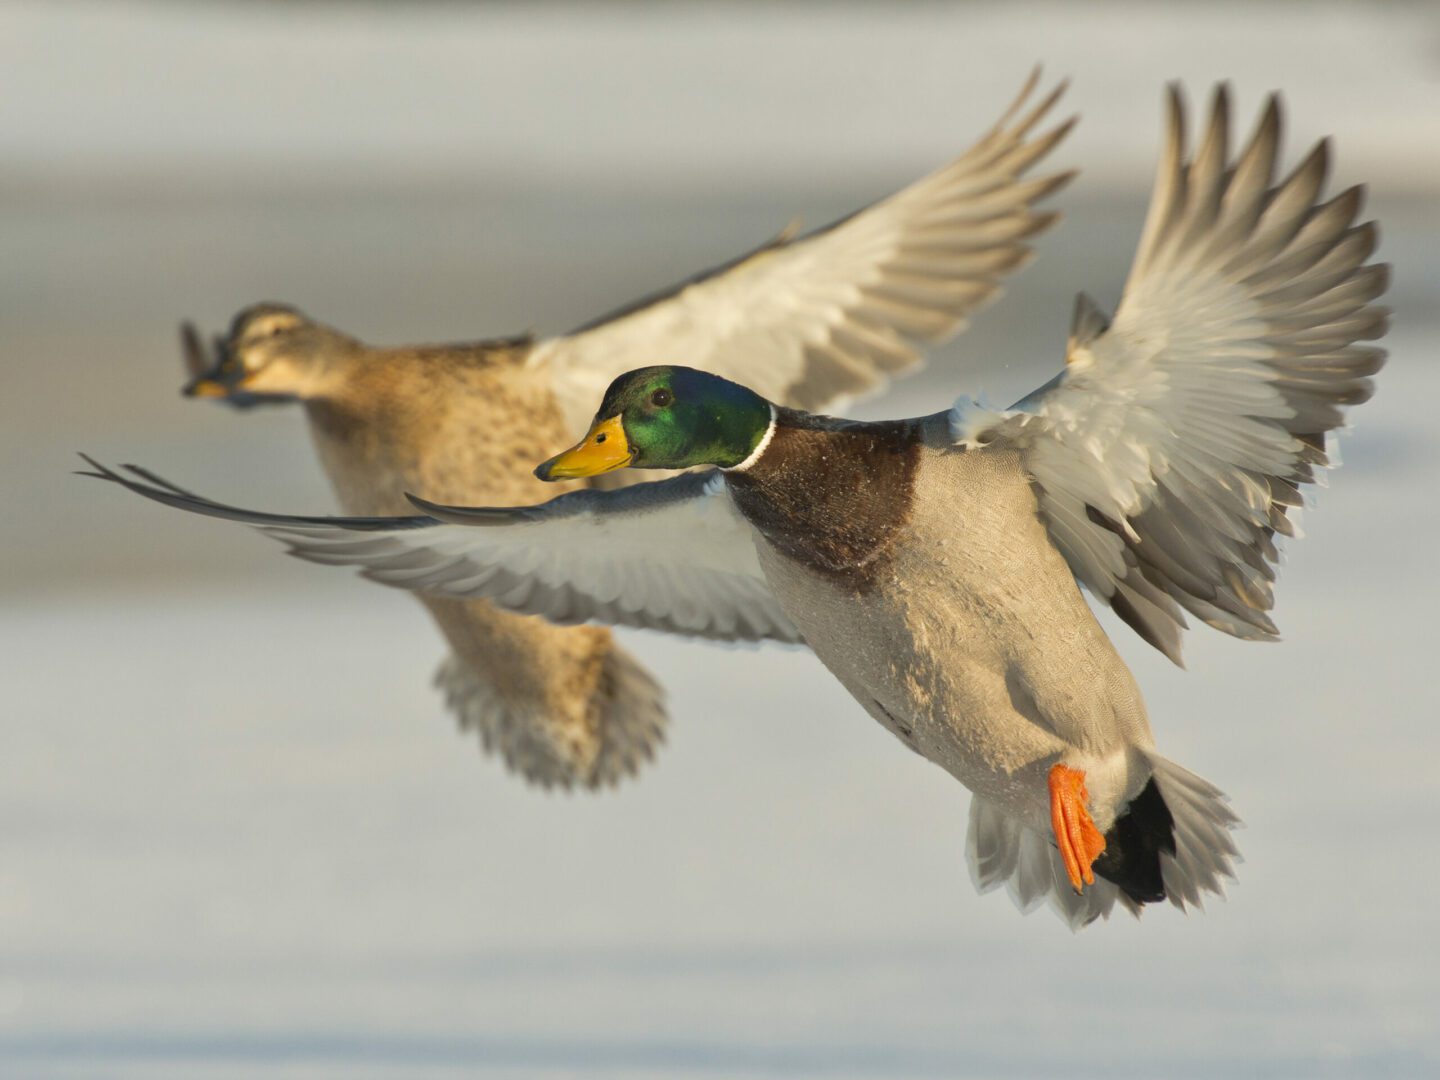 A Pair of Mallards flying together